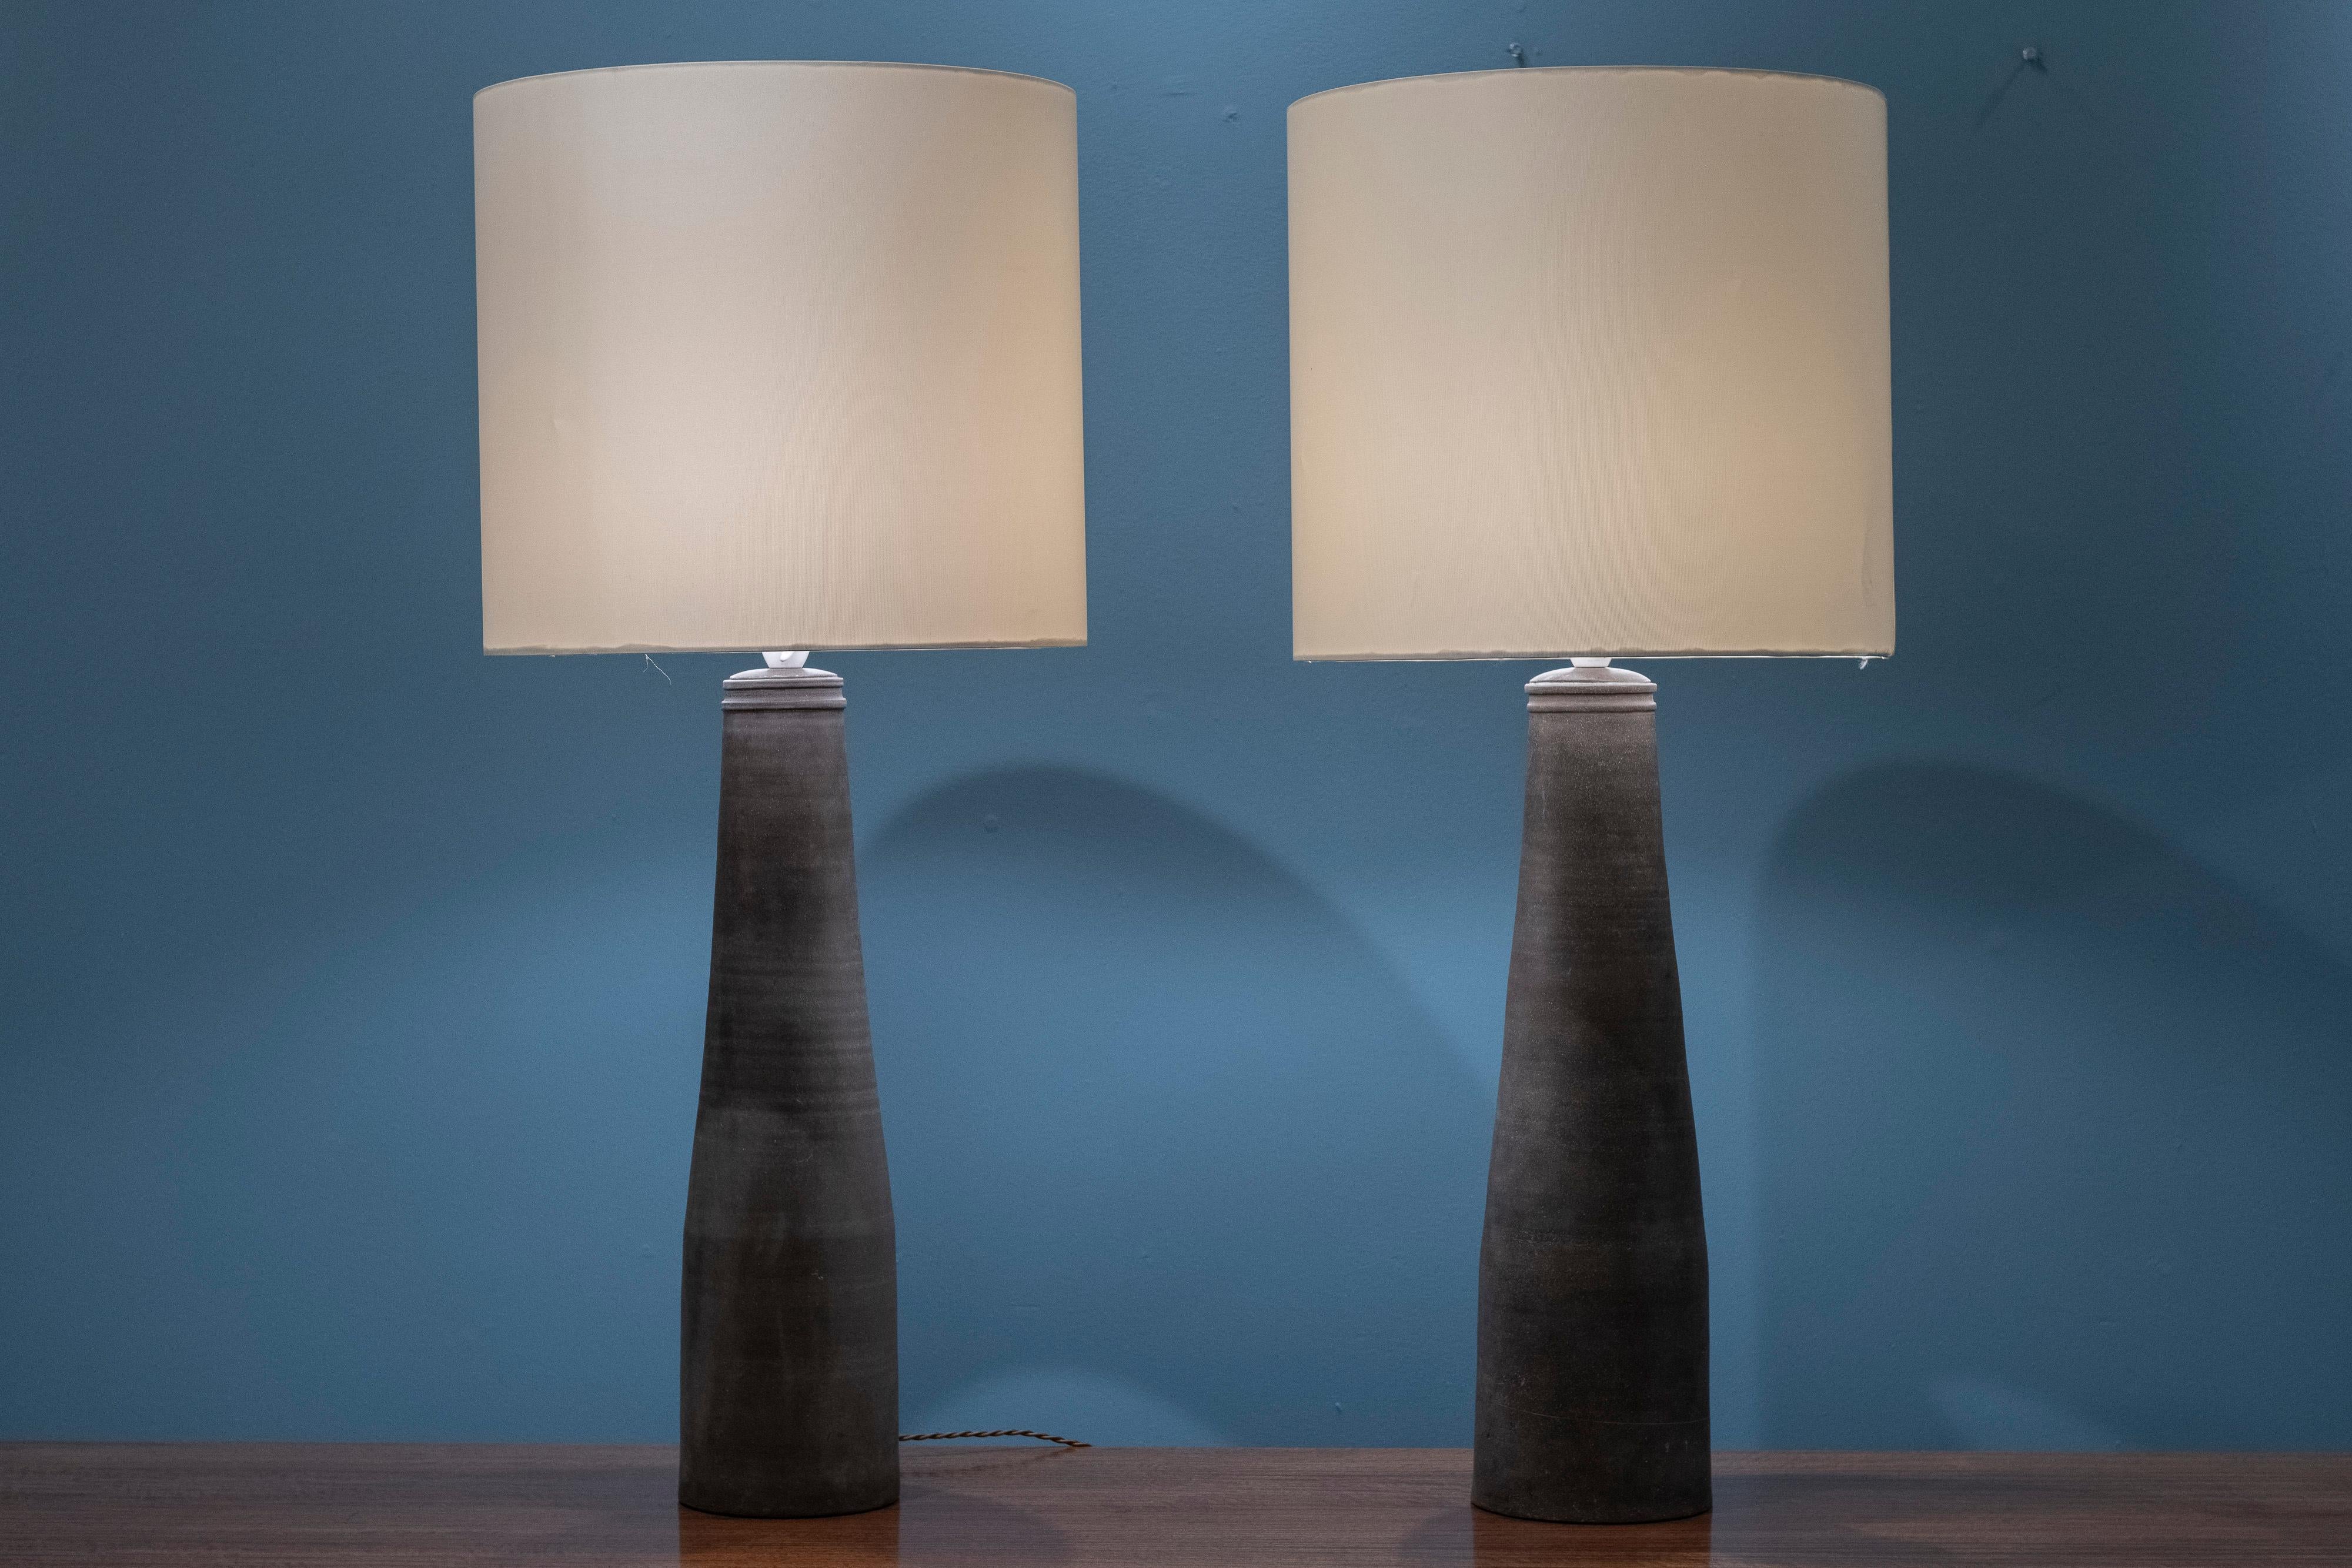 Nils Kahler design ceramic table lamps for Herman A Kahler, Denmark. Impressive and large scale pair of lamps, organic and imperfect form that is stunning. Rare model in very good original condition with new wiring and good but not perfect shades.